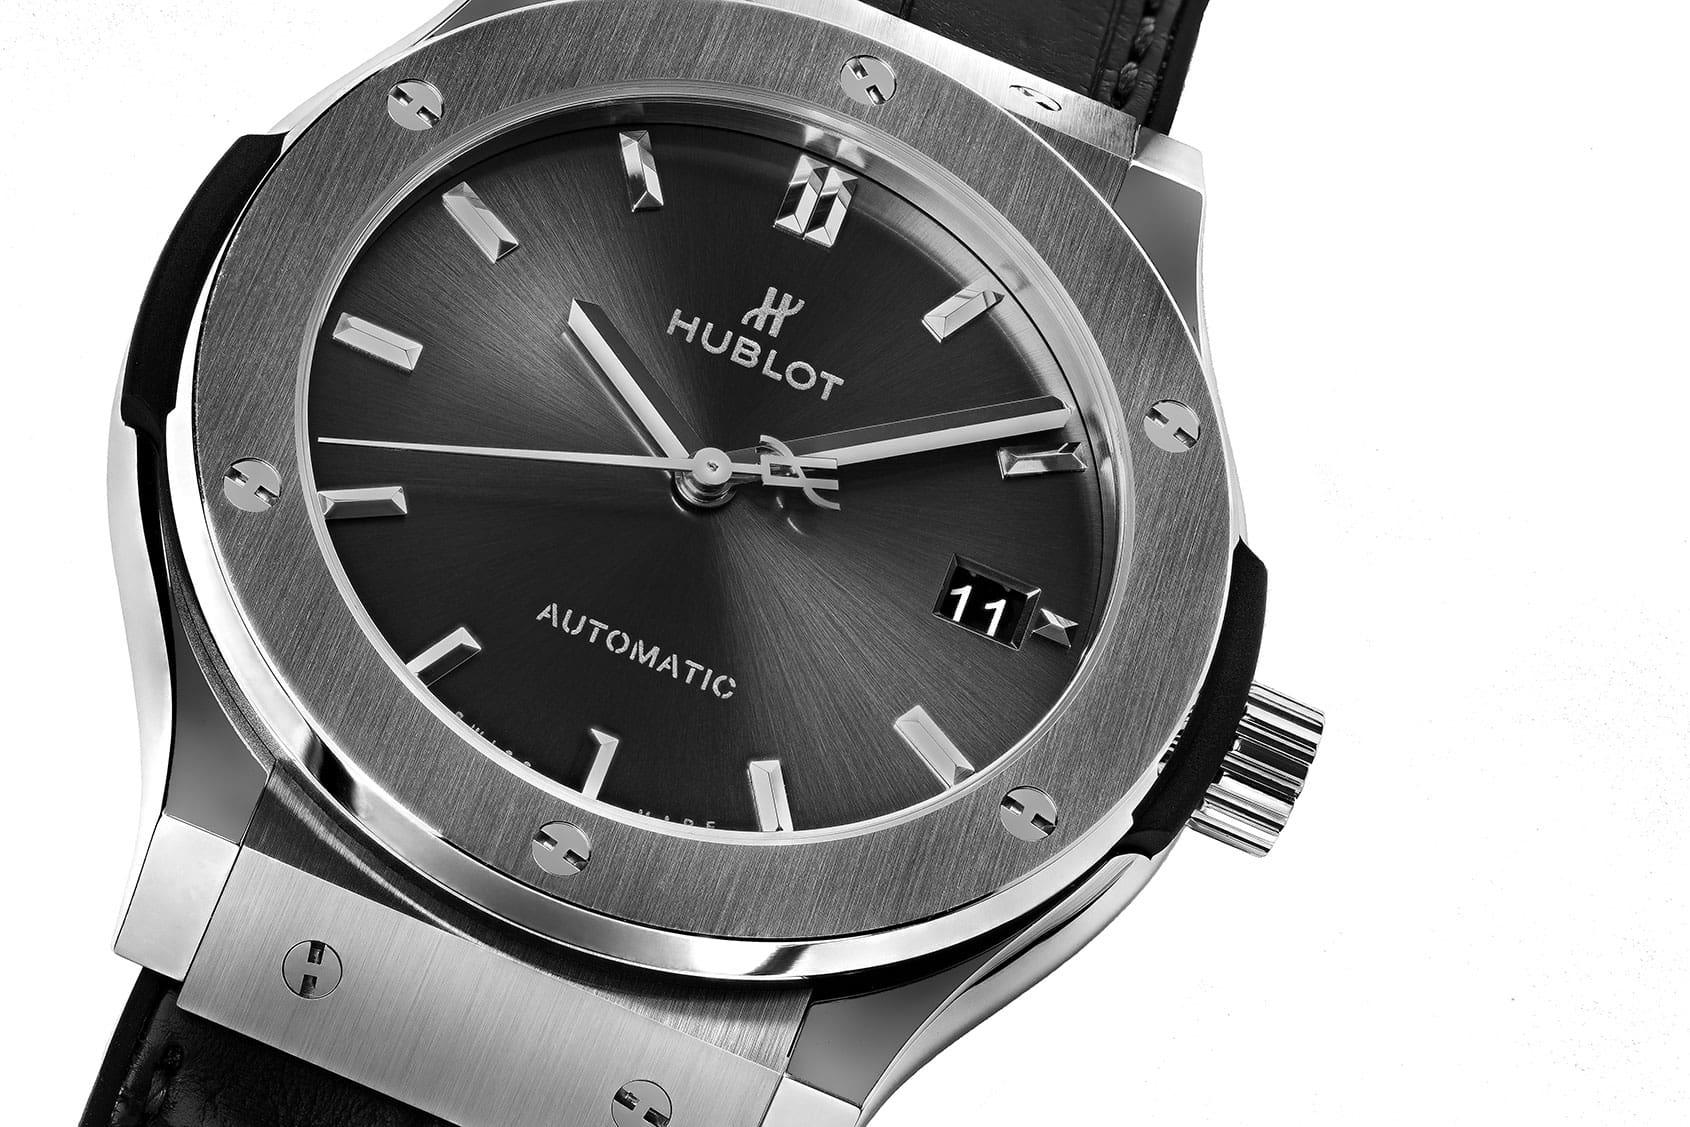 INTRODUCING: The Hublot Classic Fusion Racing Grey collection